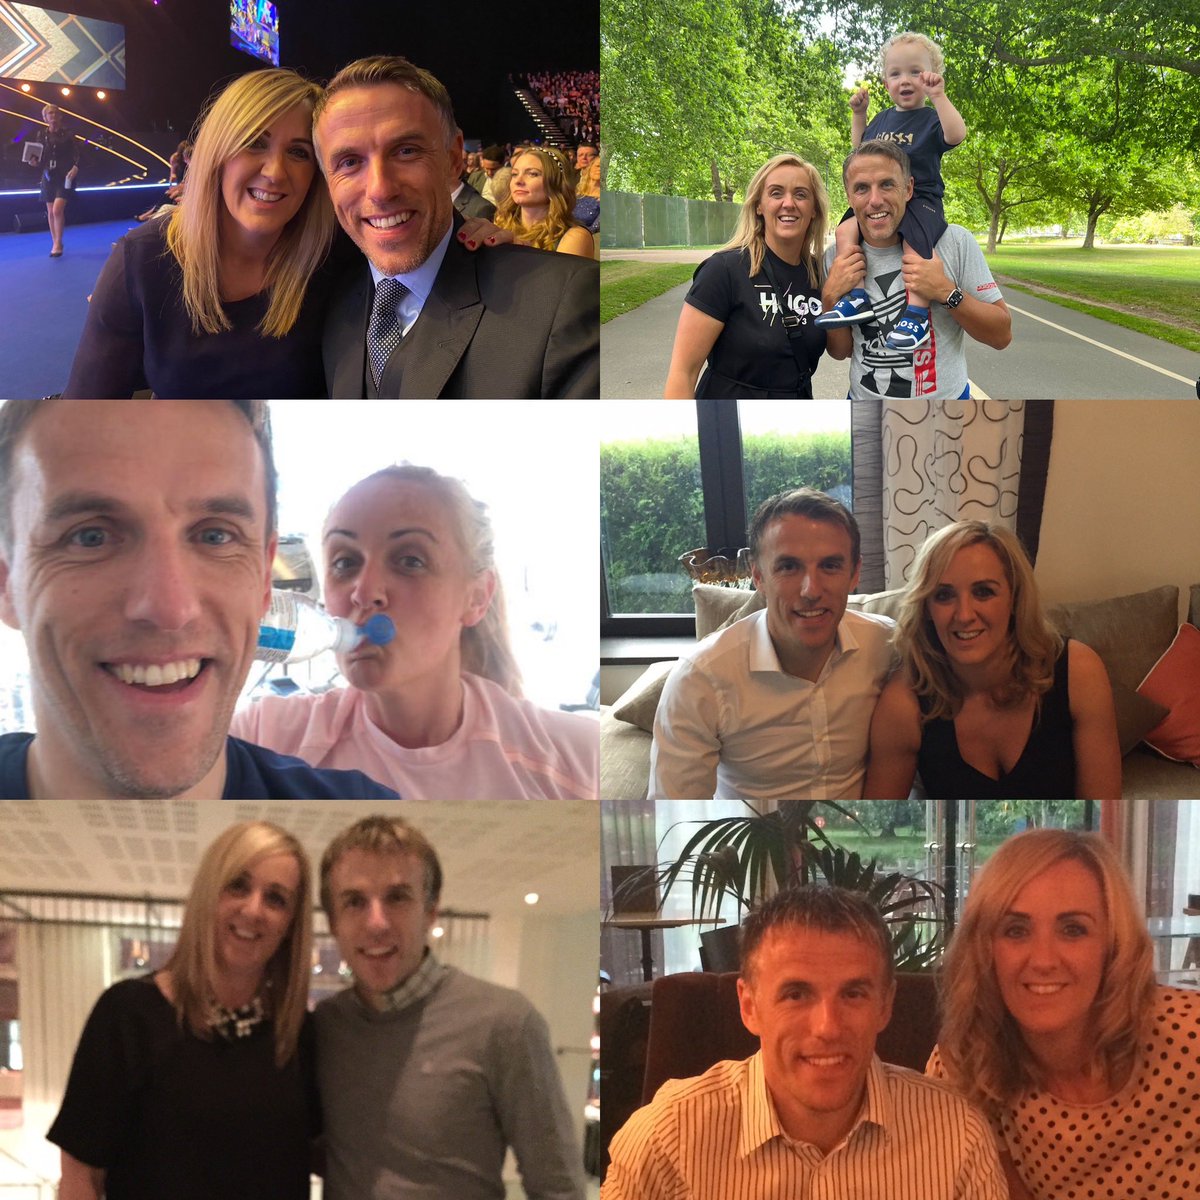 Happy birthday @Fizzer181 this day is always special because I share it with you ❤️